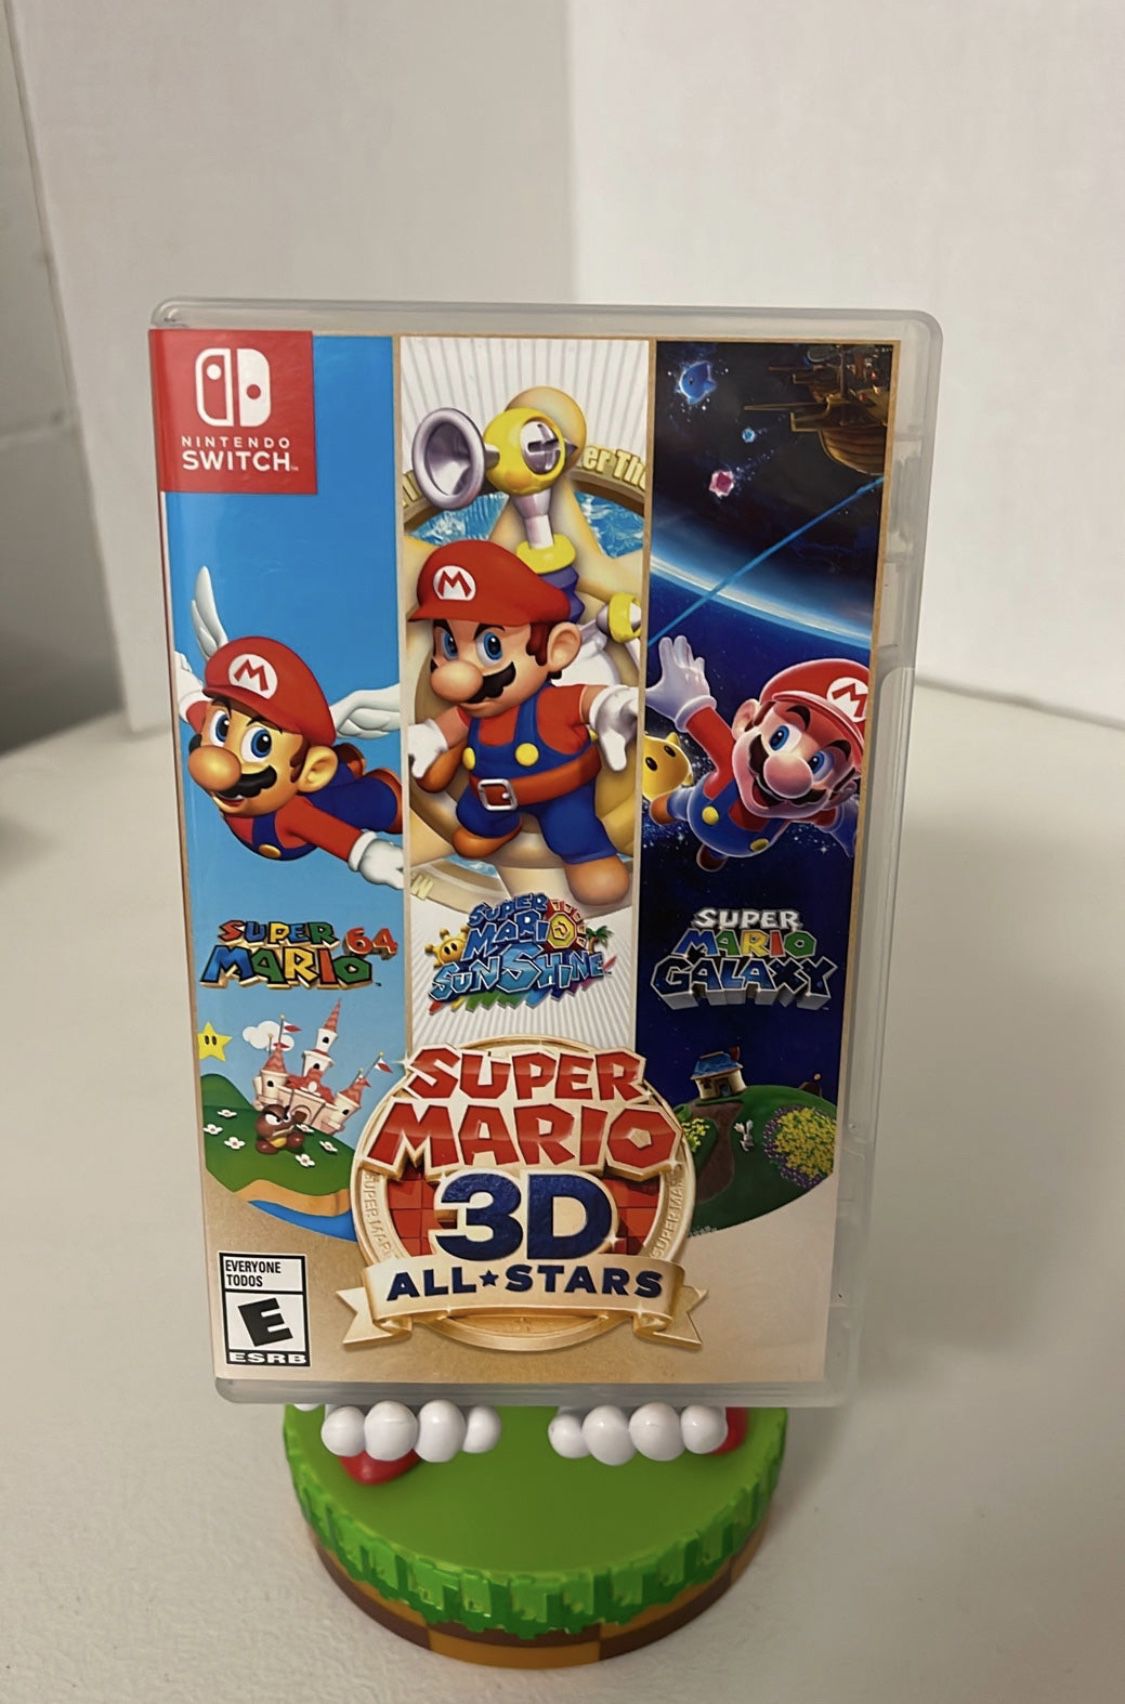 Super Mario 3D All-Stars for Nintendo Switch